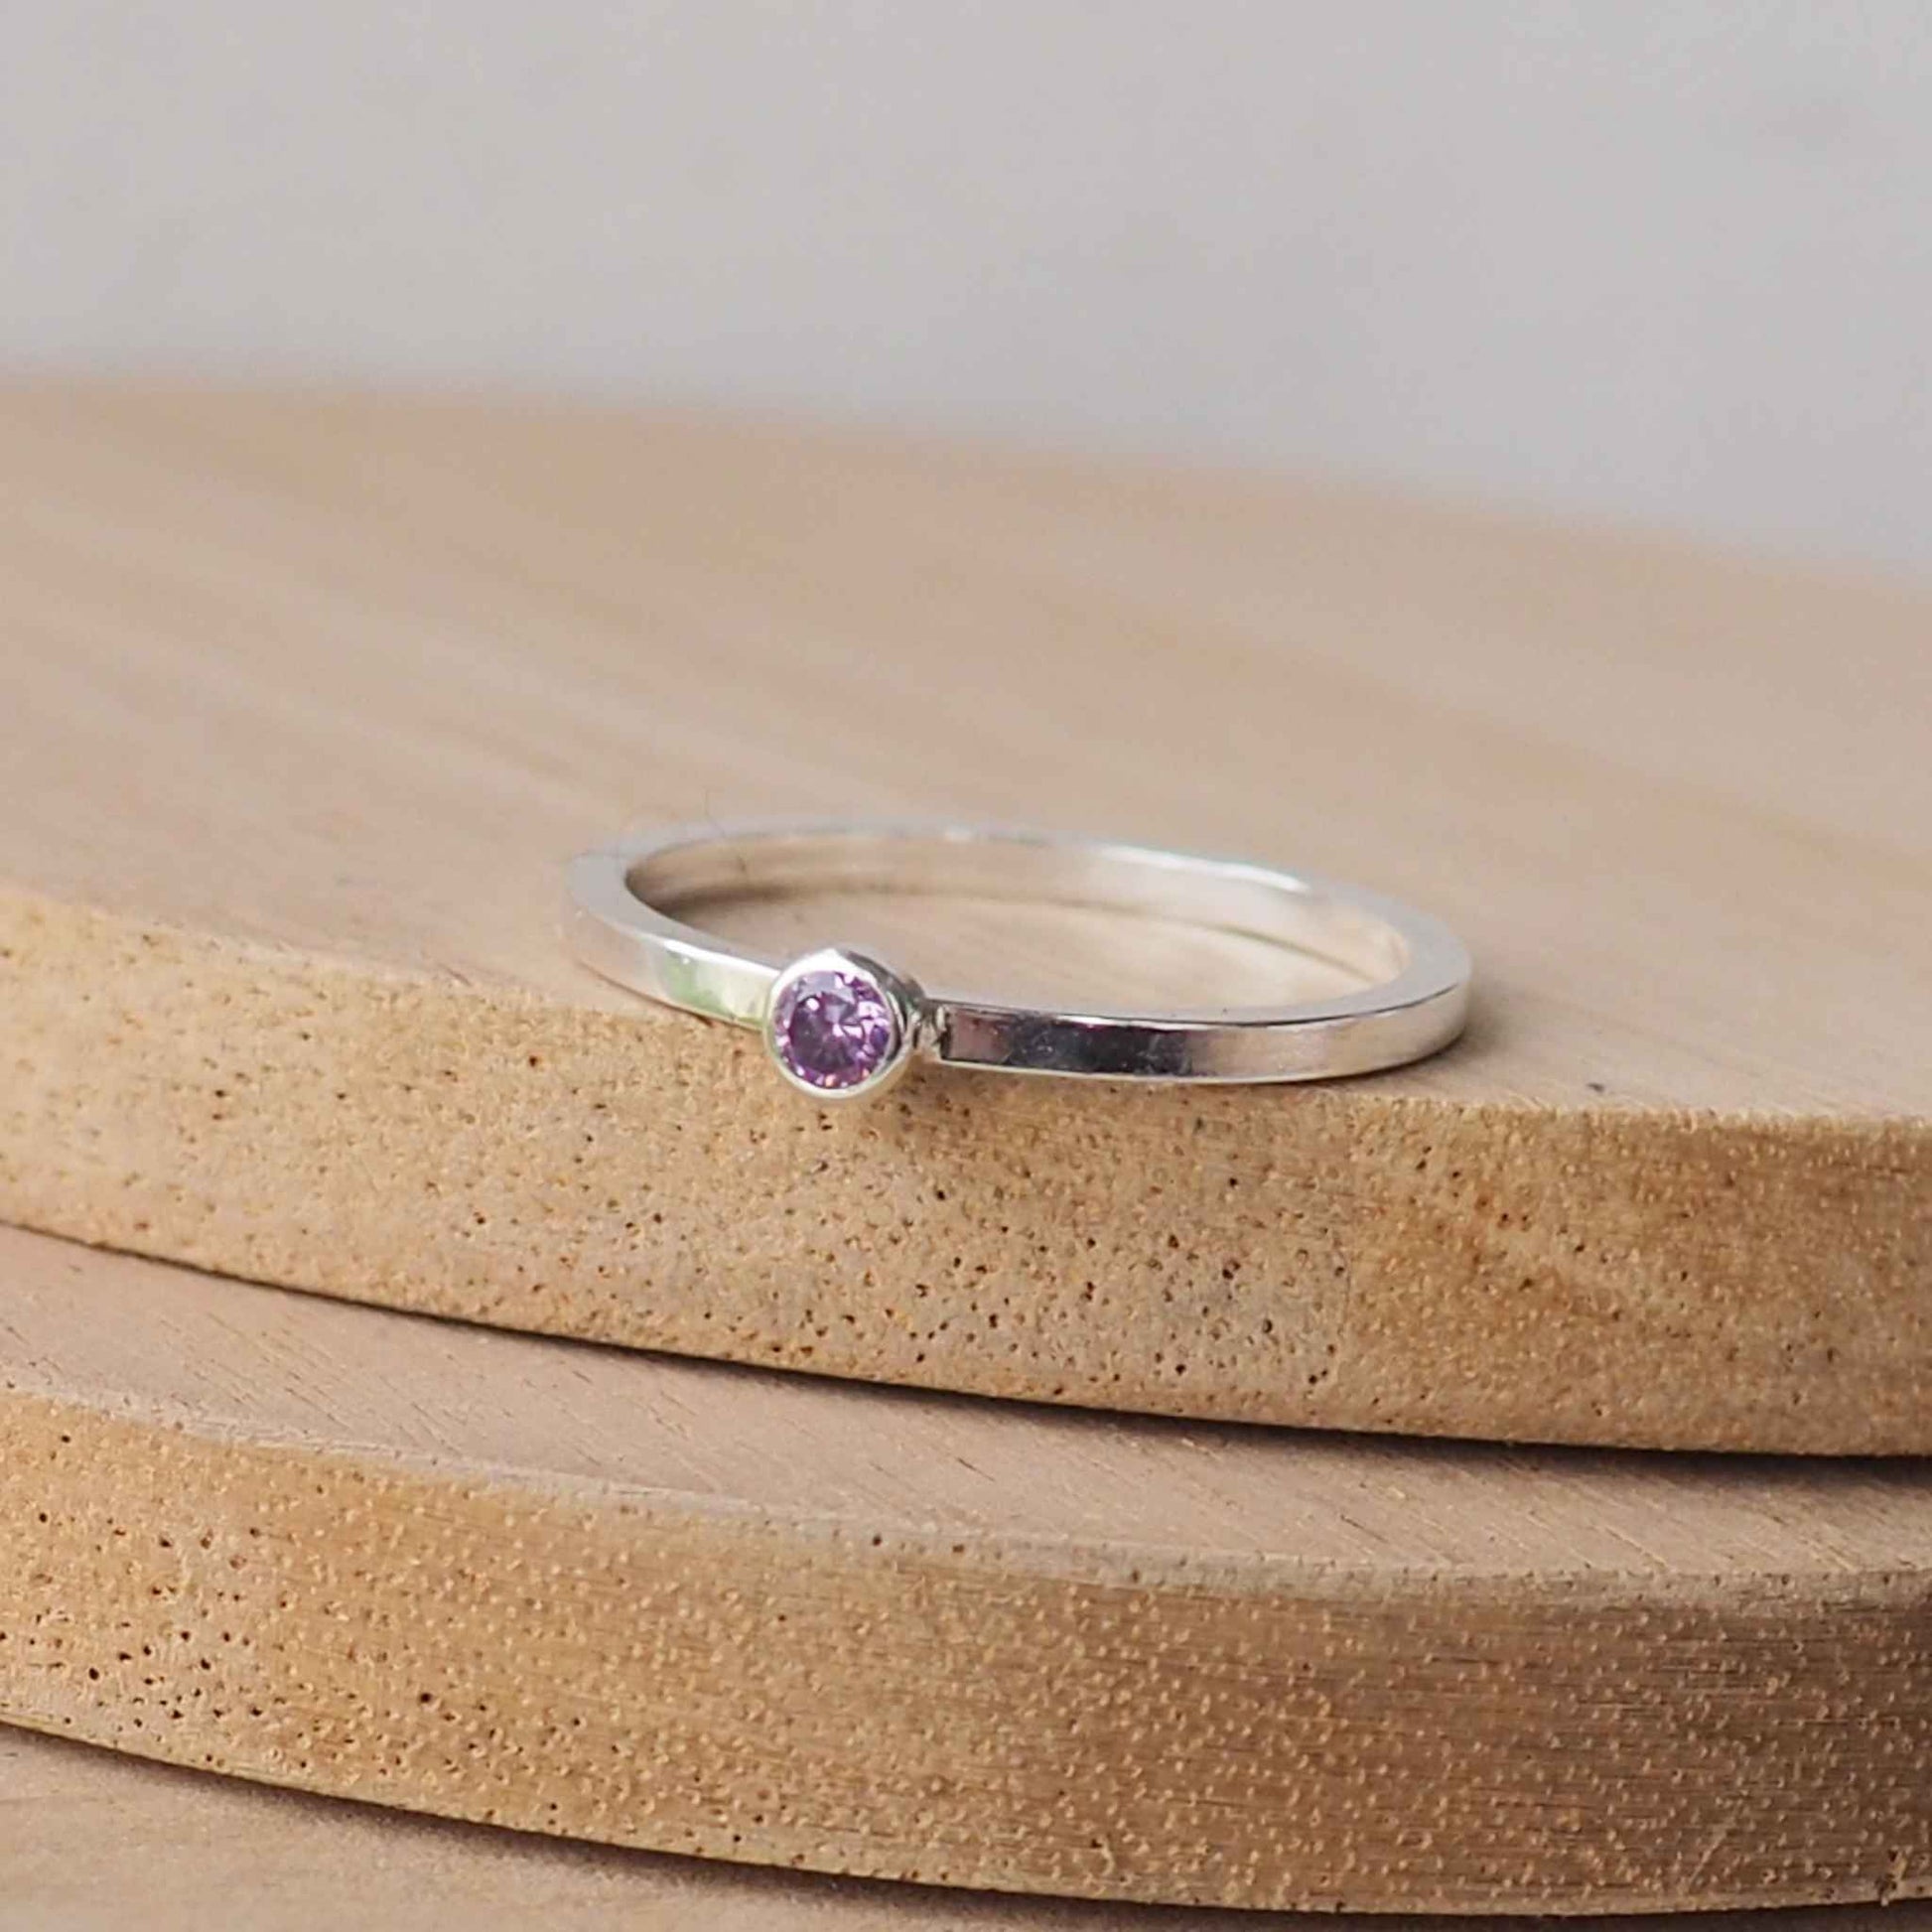 Silver ring with a purple gemstone. The ring is simple in style with no embellishment , with a square wire band 1.5mm thick with a simple Purple Amethyst 2mm round cubic zirconia stone set in an enclosed silver setting. The gem is very small and minimal on the band. Amethyst is birthstone for February. The ring is Sterling Silver and made to your ring size. Handmade in Scotland by Maram Jewellery